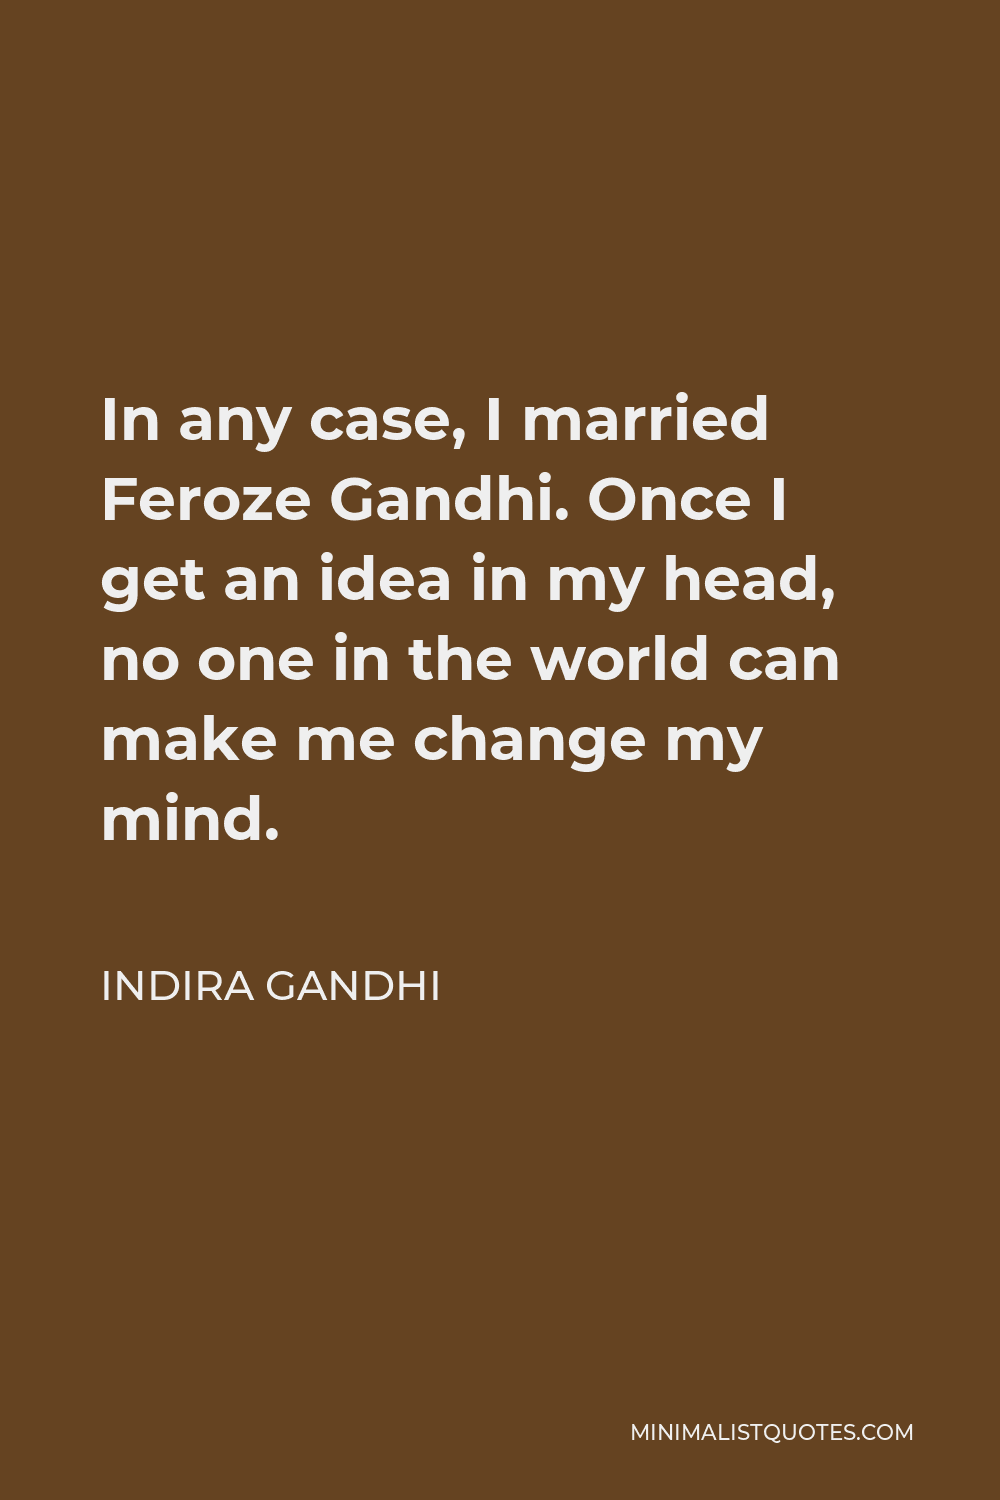 Indira Gandhi Quote - In any case, I married Feroze Gandhi. Once I get an idea in my head, no one in the world can make me change my mind.